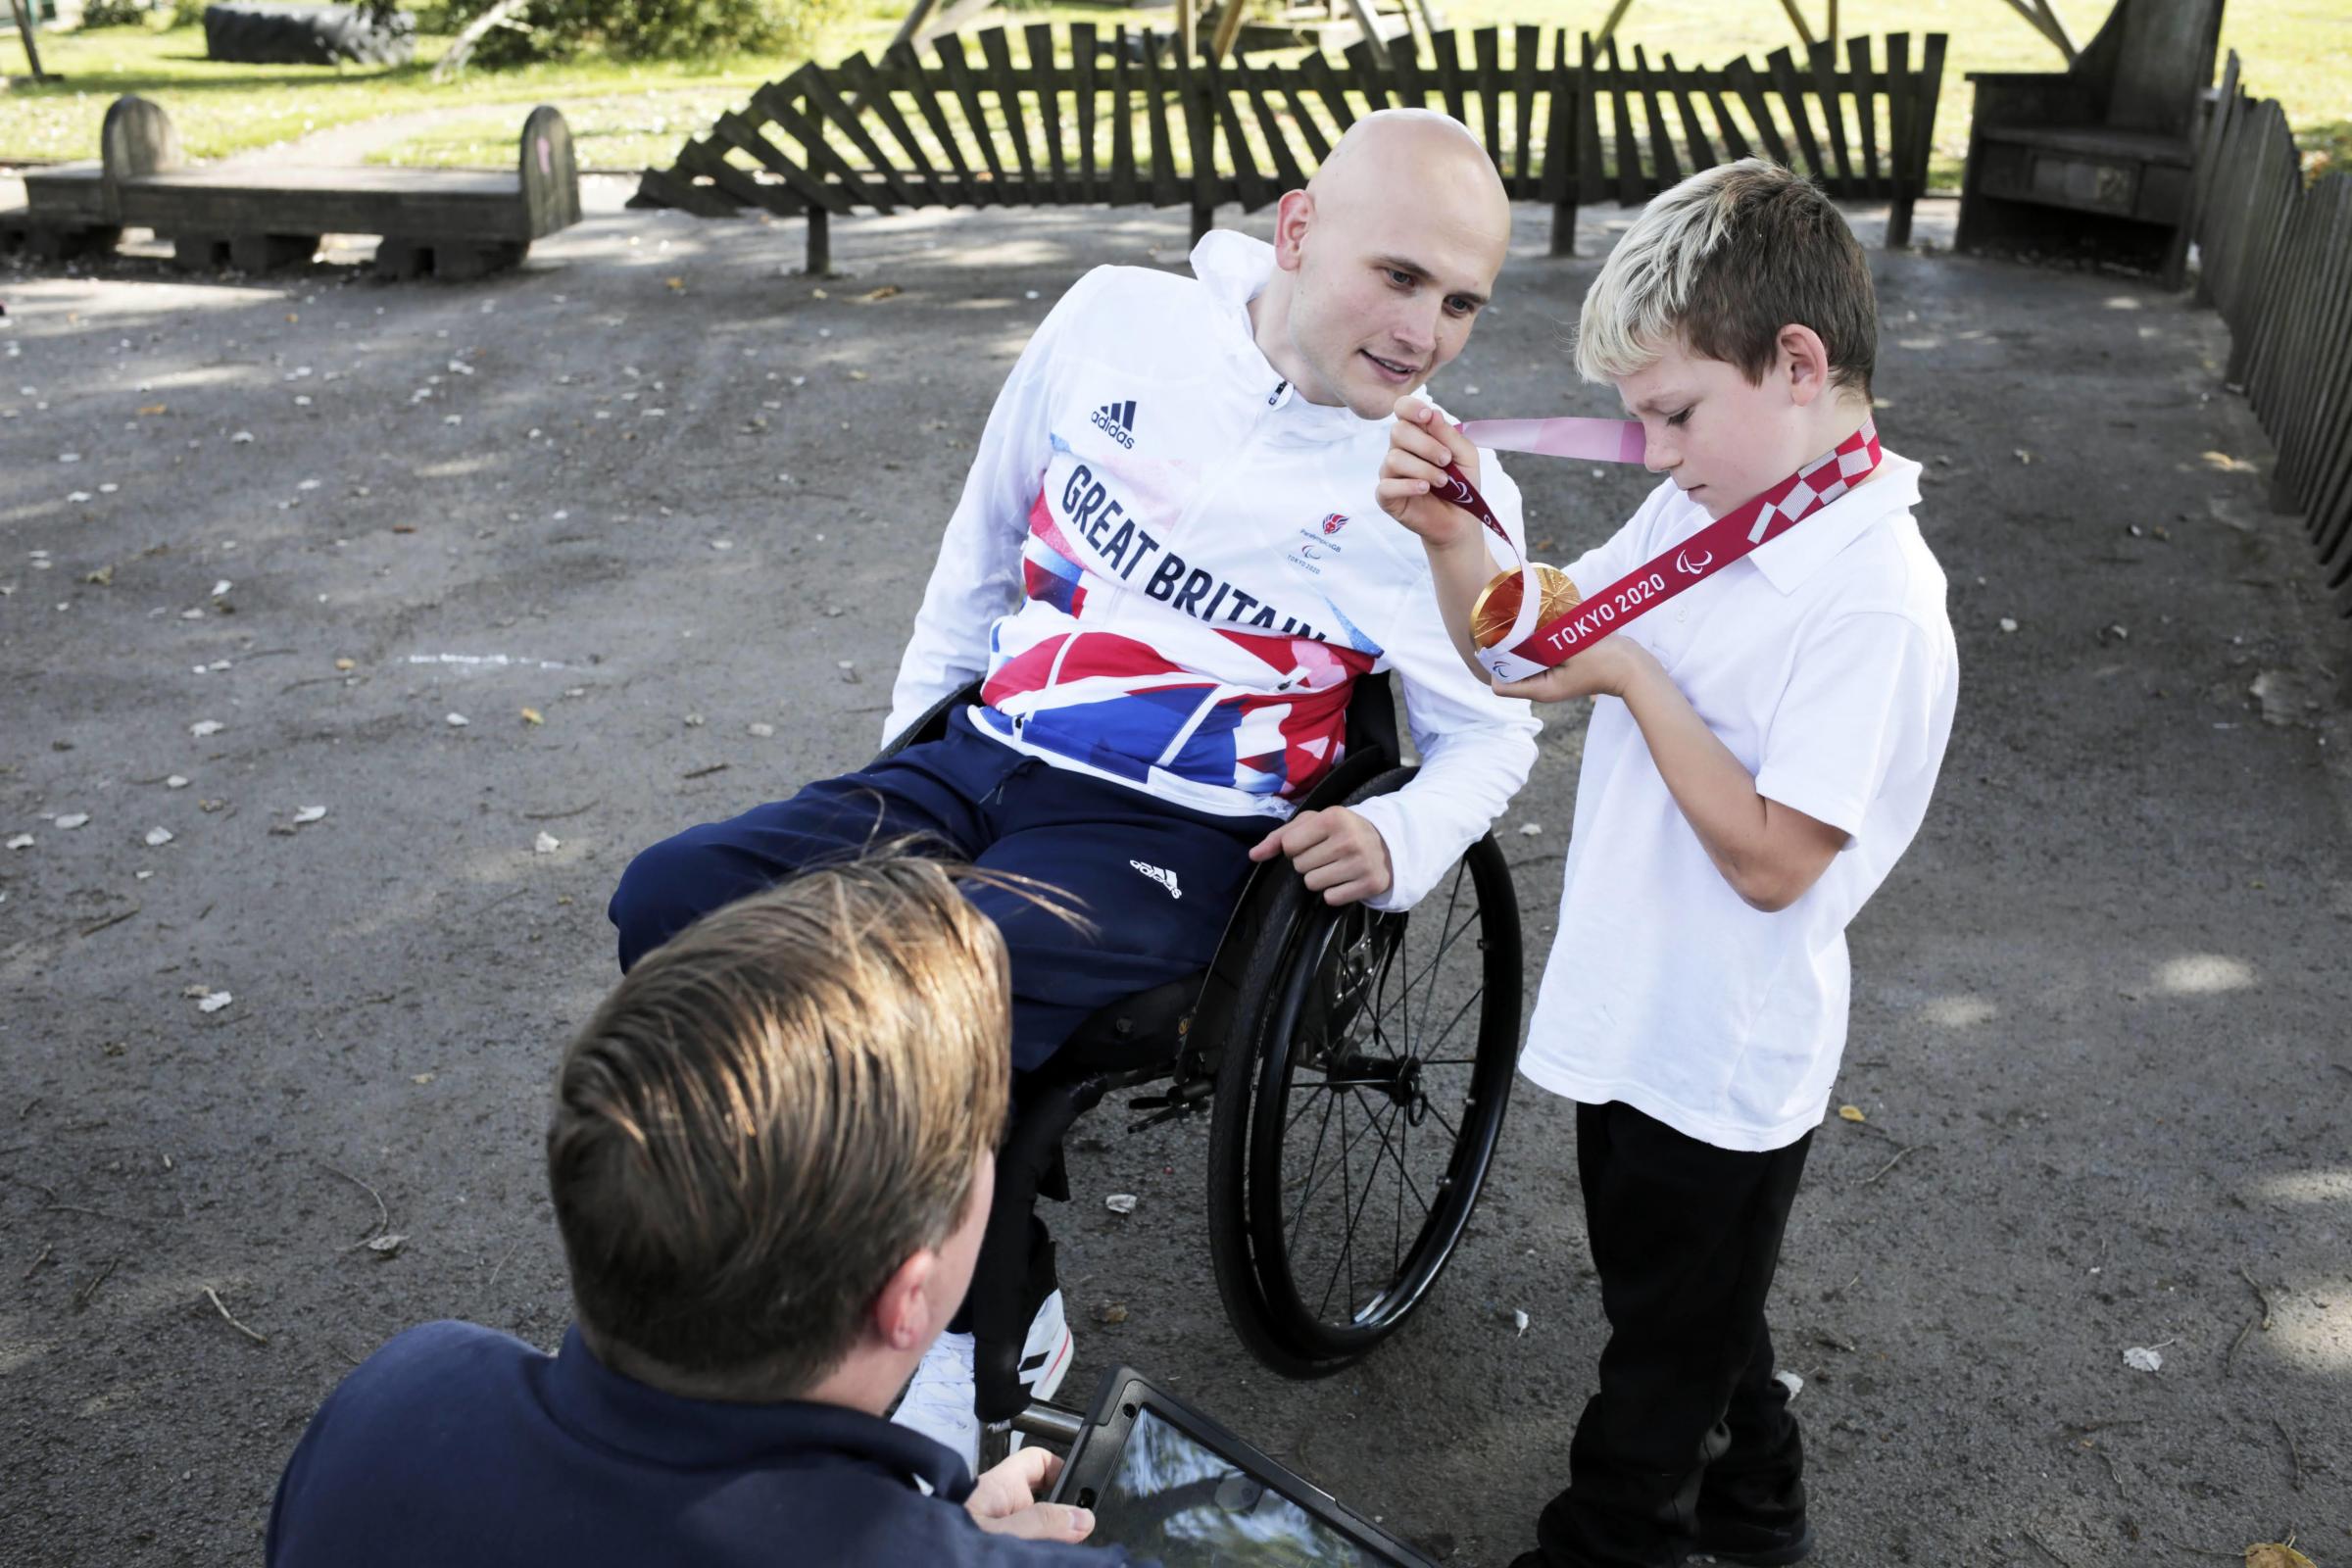 Gold medal winning paralympian Jack Smith with year 4 pupil Jayden Hind at Tanfield Lea Community Primary School, near Stanley. Photograph: Stuart Boulton.Gold medal winning paralympian Jack Smith at Tanfield Lea Community Primary School, near Stanley